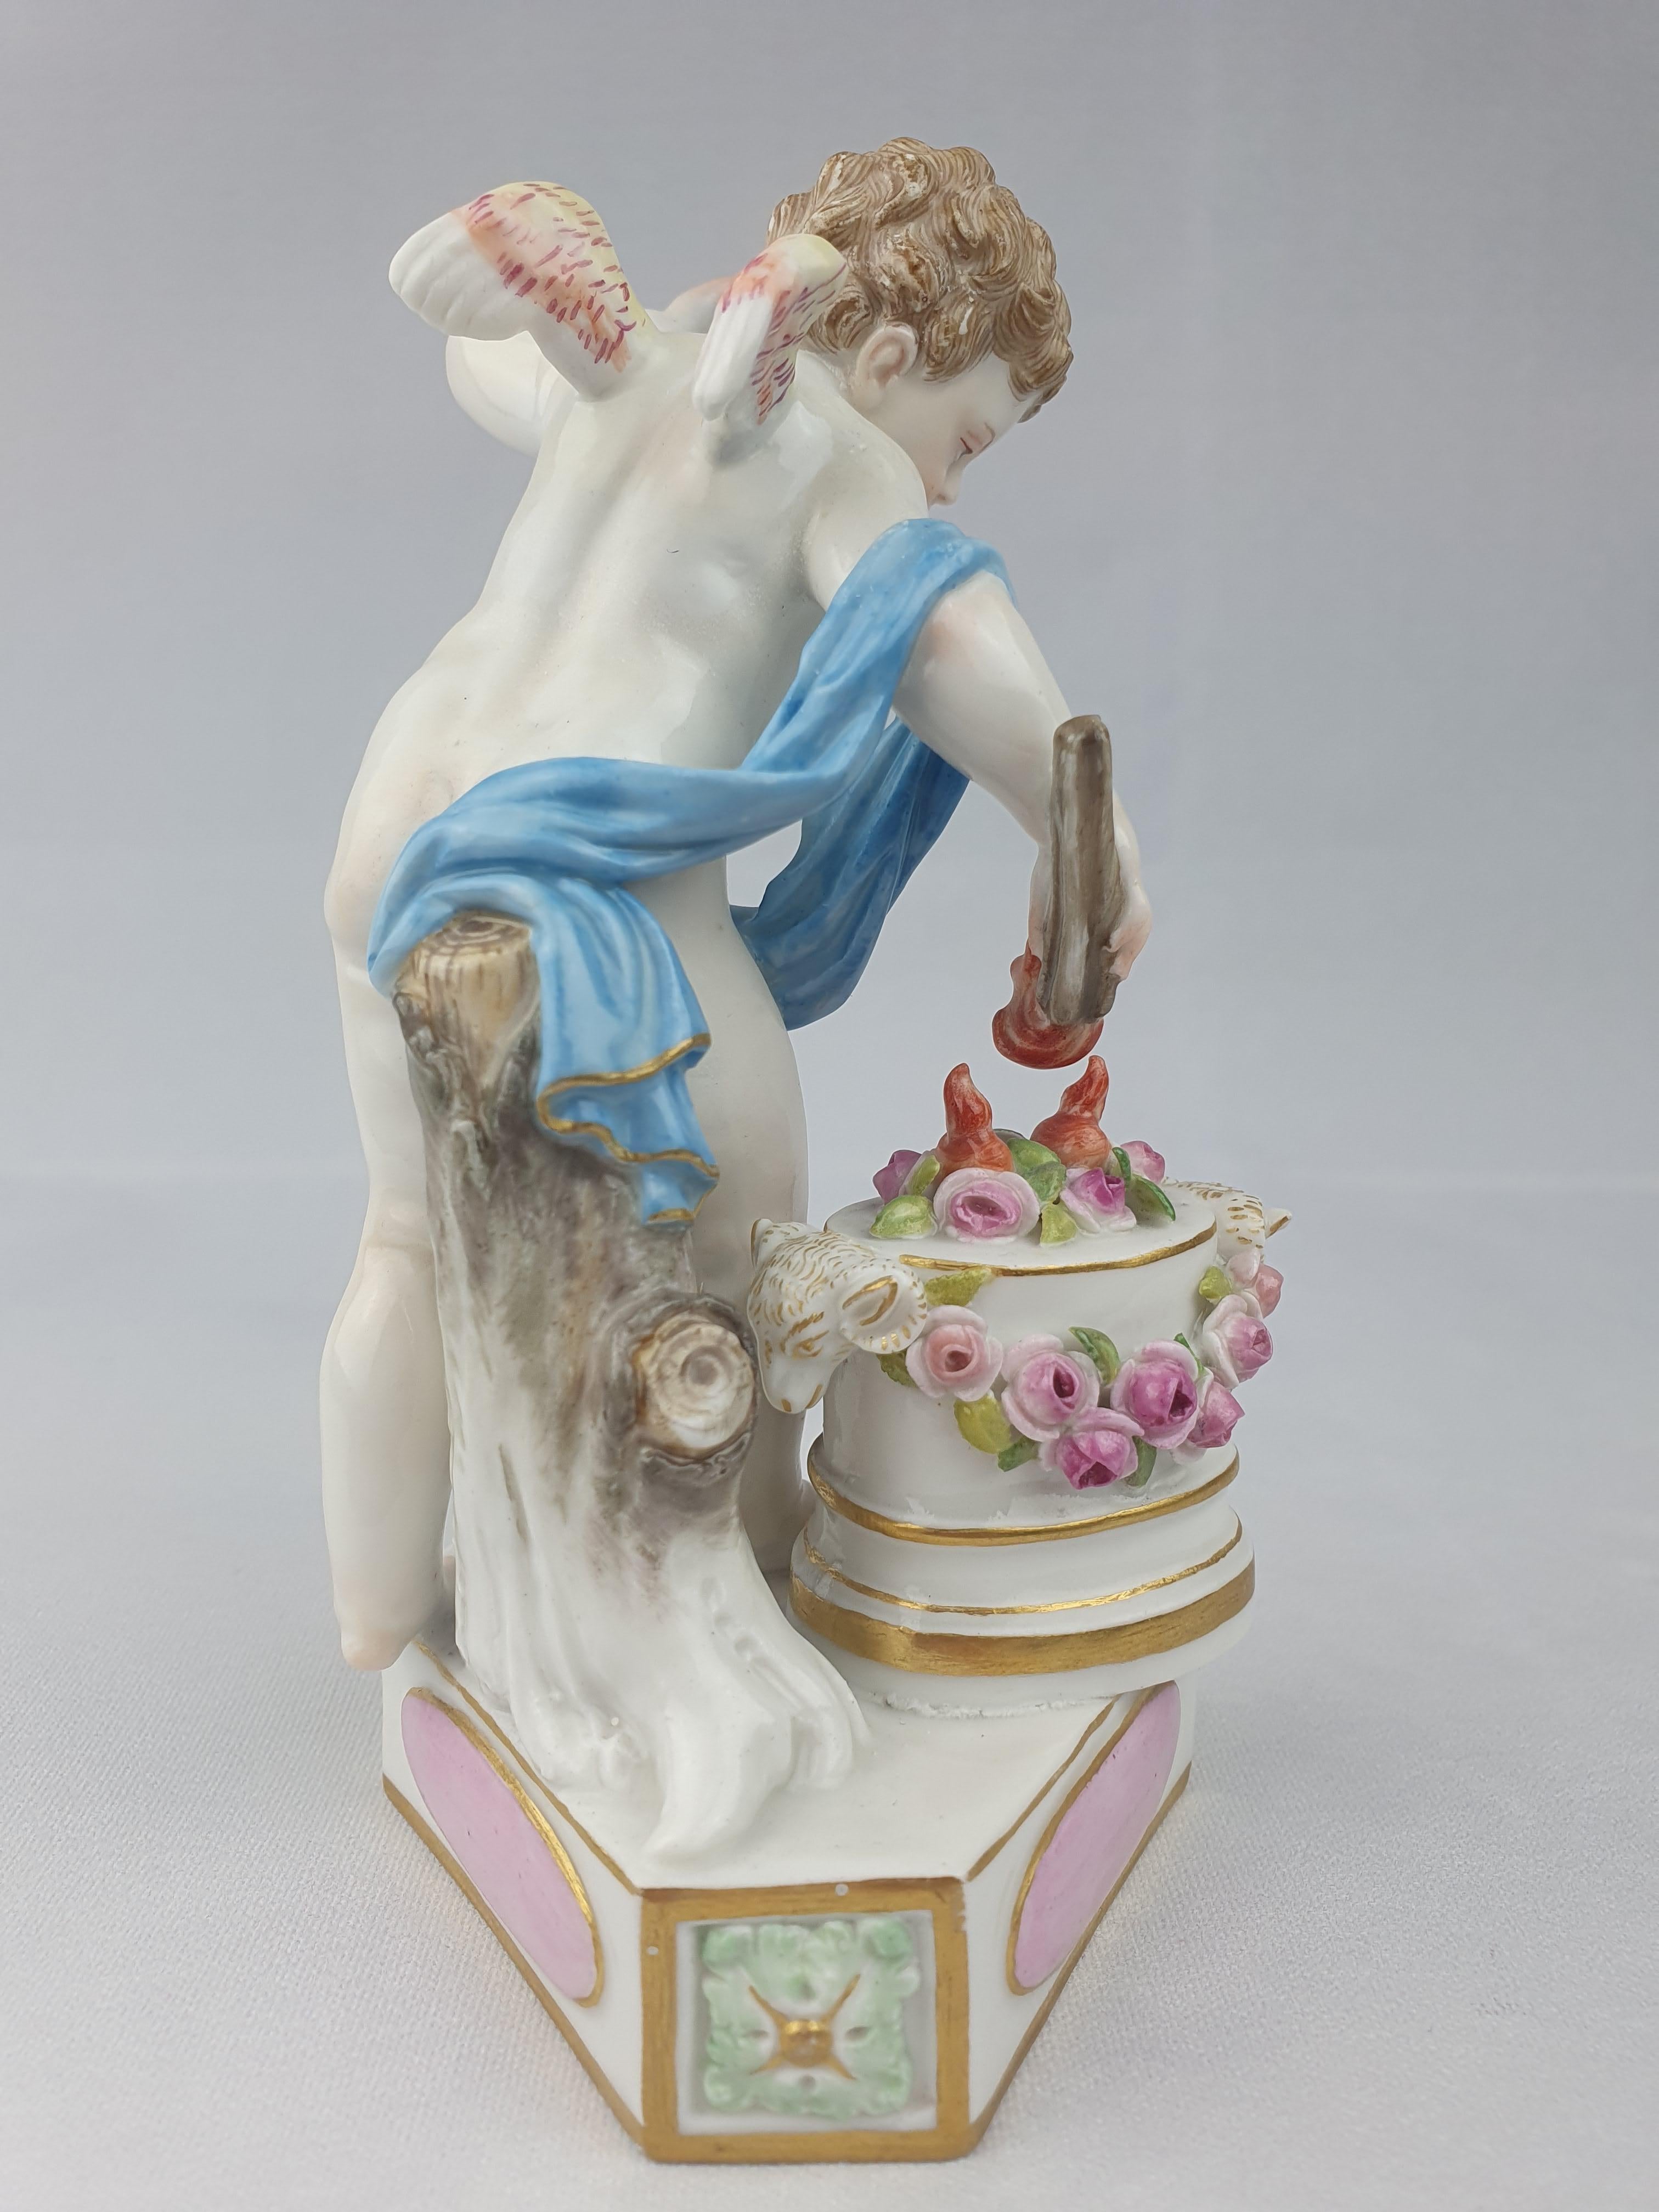 Meissen figure of cupid lighting hearts with flame from a series of 16 each inscribed with the motto in french on the base. In this instance it says ‘Je Les Enflamme’ ‘I Ignite them’. All 16 cupids were origionally modelled by Acier between 1775